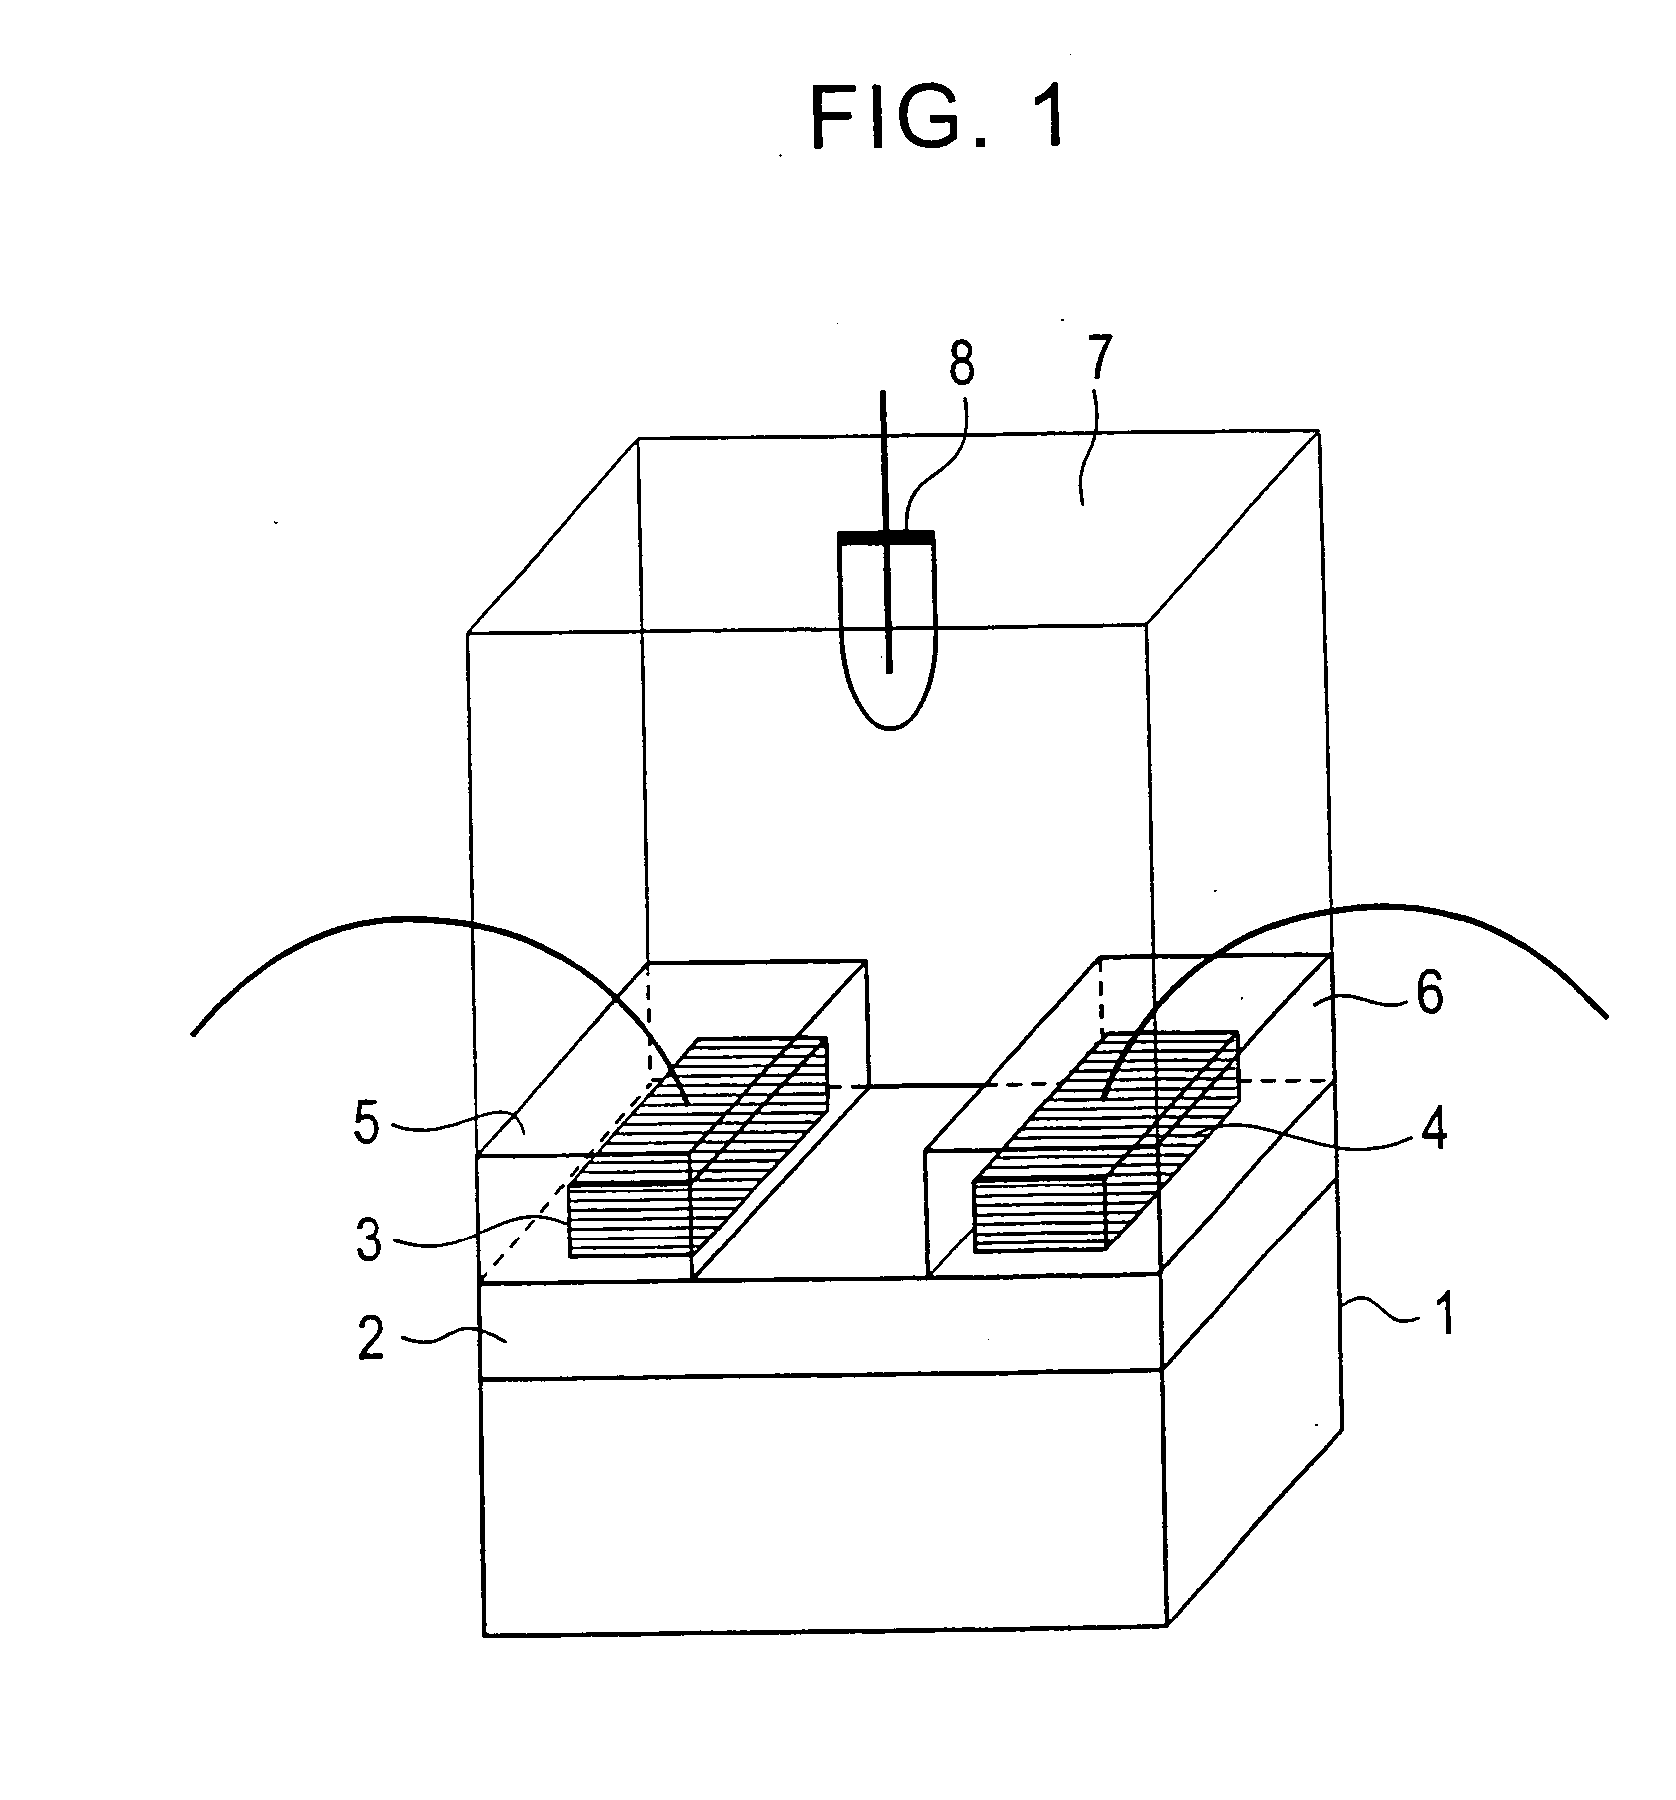 P channel filed effect transistor and sensor using the same